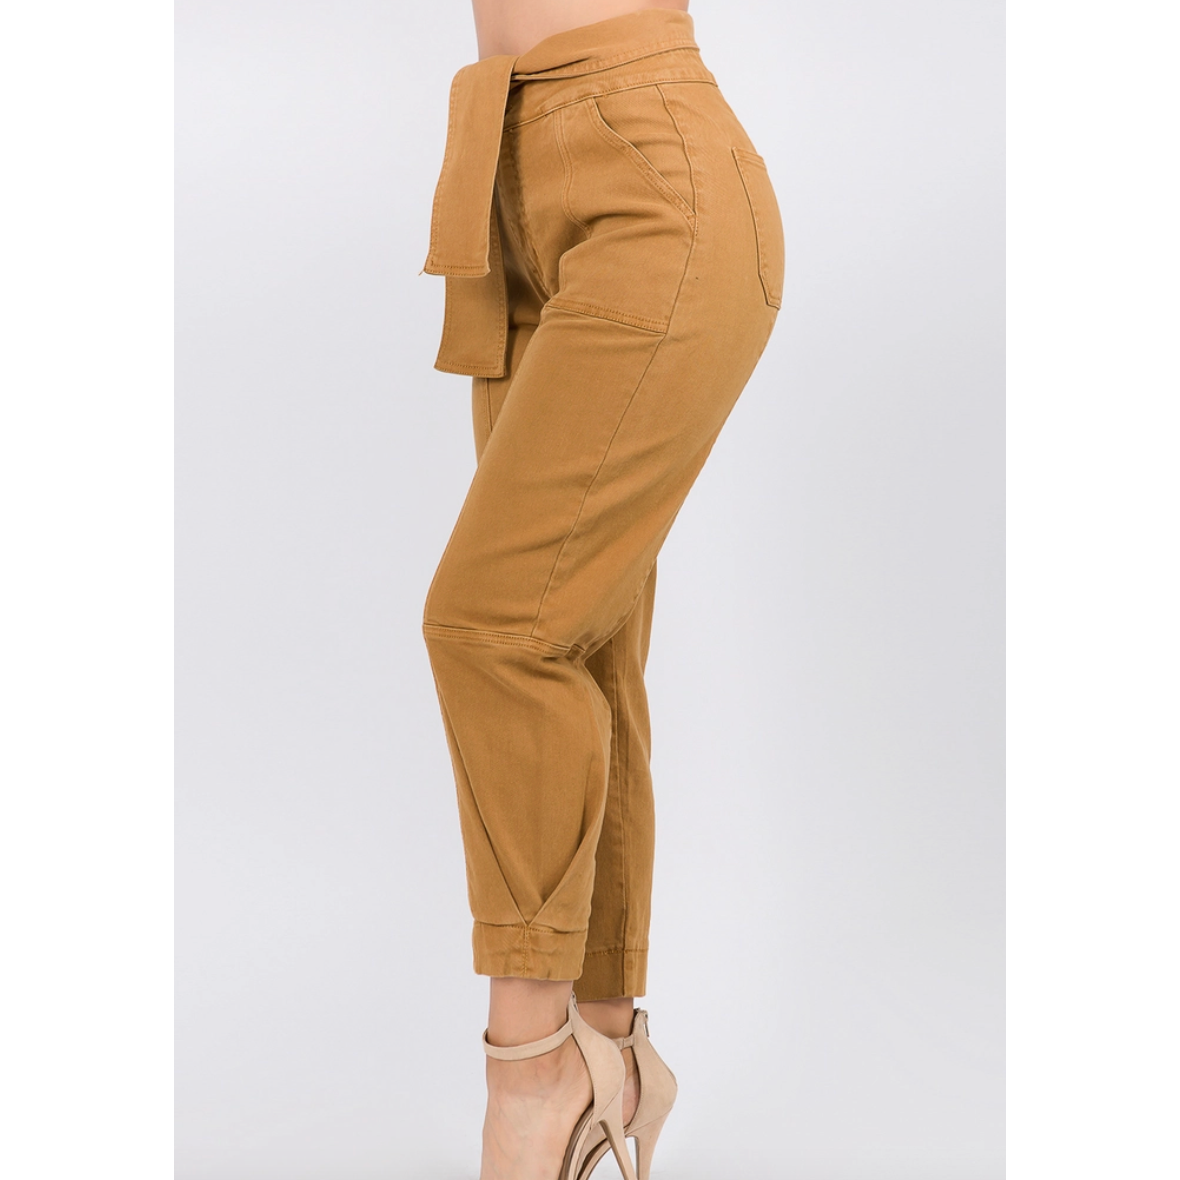 Curvy Fit | Off White Big Bell Pants | Bell Pants | Formal Pants | Women  Stylish Pants | Flared Pants | Office Pants | Designer Pants | Bell Bottoms  | Party Pants | Bootcut Pants | Made In India